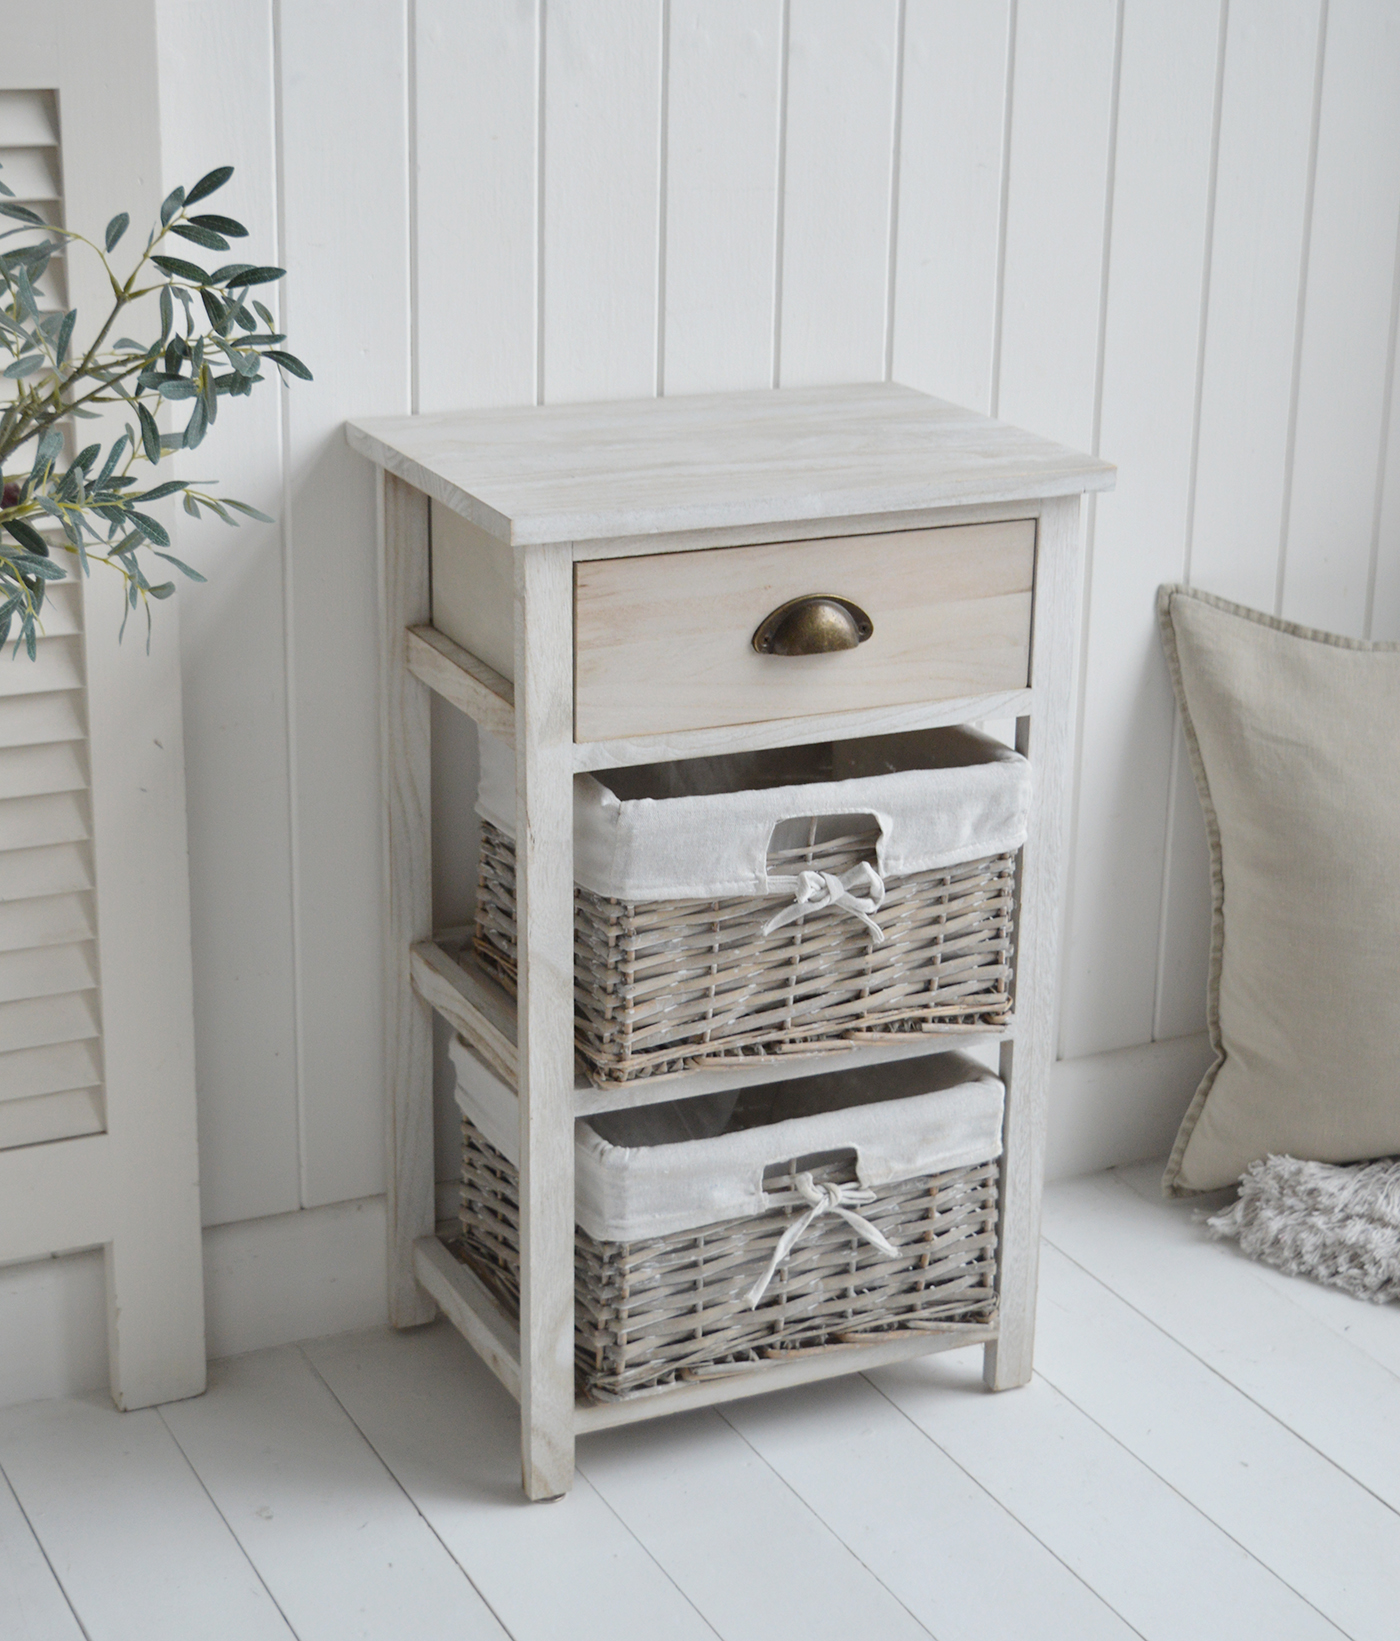 Dorset Cabinet with 3 Drawers in light grey washed wood - New England Coastal and Modern Country Furniture. Storage furniture with baskets. Ideal for storage of toiletries